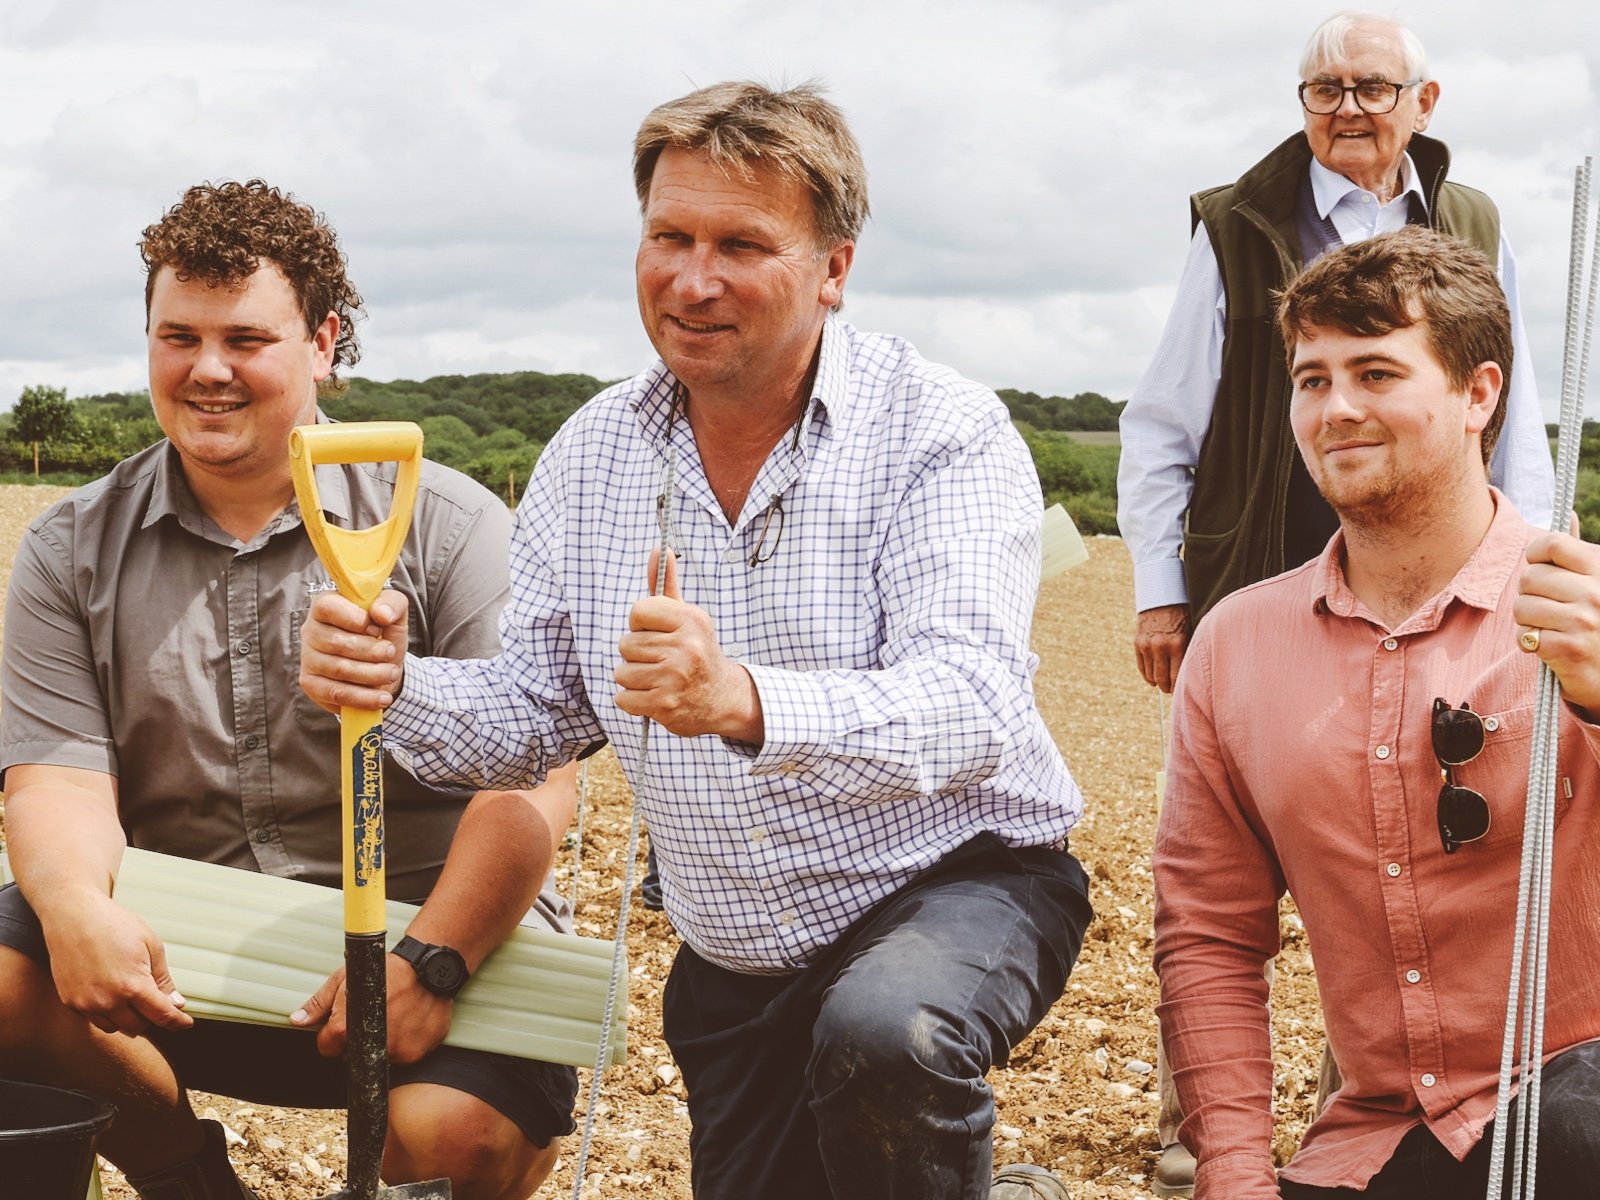 Langham manager Olly Whitfield, owner Justin Langham and winemaker Tommy Grimshaw